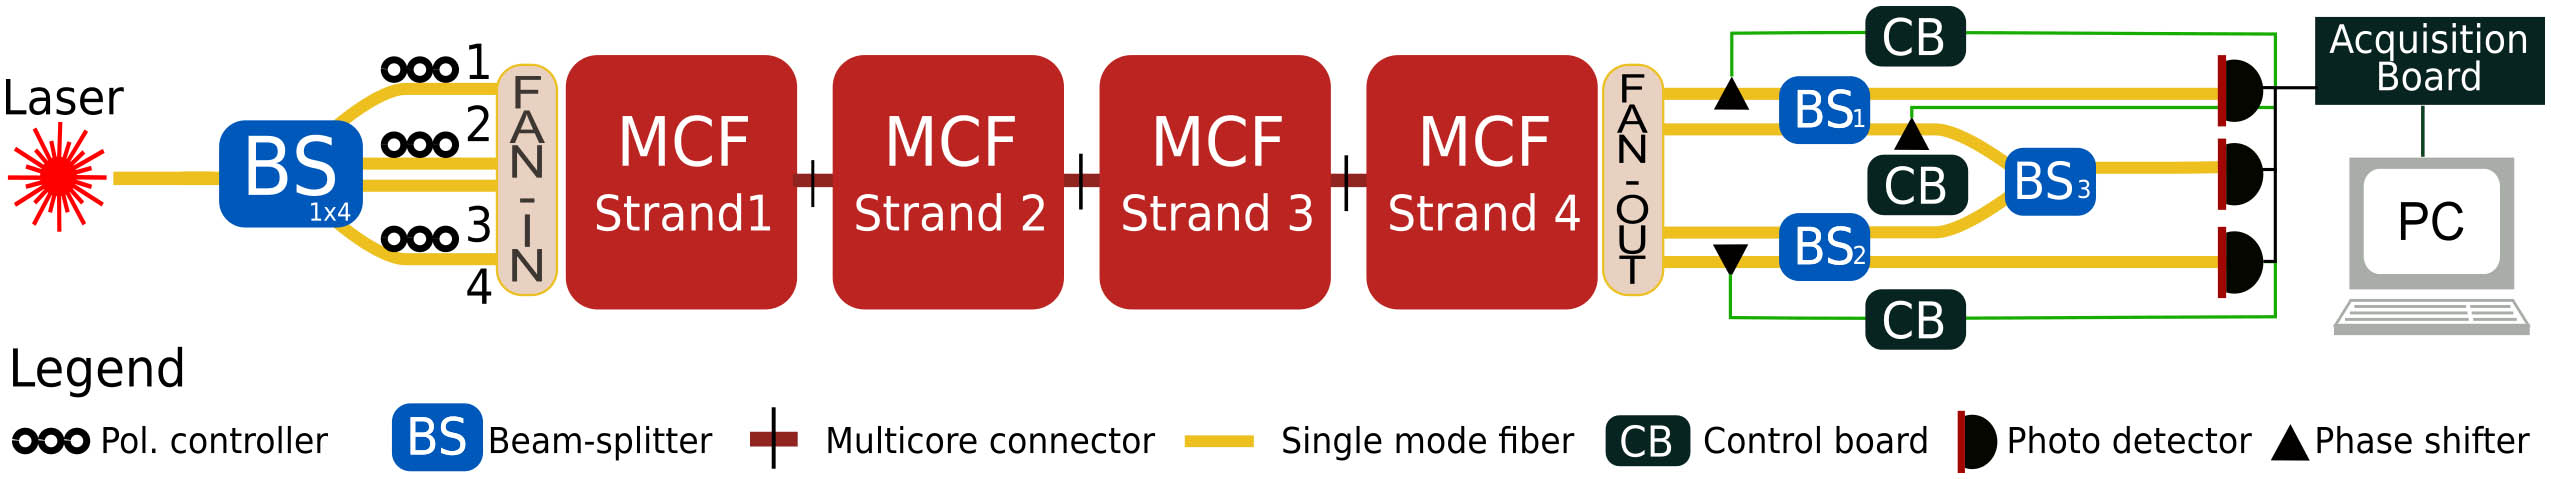 Experimental setup. A continuous wave laser at 1550 nm is equally divided into four paths through a 1×4 beam splitter (BS1×4). Three polarization controllers are used to align the polarization inside the different cores. The four single-mode fibers are then individually connected to the fan-in input of the MCF. Thanks to the reconfigurability of the optical system, it is possible to set the number of subsequent MCF strands to be tested in the experiment (each strand is approximately 6.29 km in length). To connect the strands to each other, an MCF connector is used. After propagation through the MCF, a fan-out device is used to divide the cores into four different single-mode fibers that are finally combined with each other by three 2×2 beam splitters (BS1, BS2, and BS3). By using three automatic control boards, each driving a phase shifter, based on the measurement output of the three detectors, we can monitor and individually control the relative phase of each core.